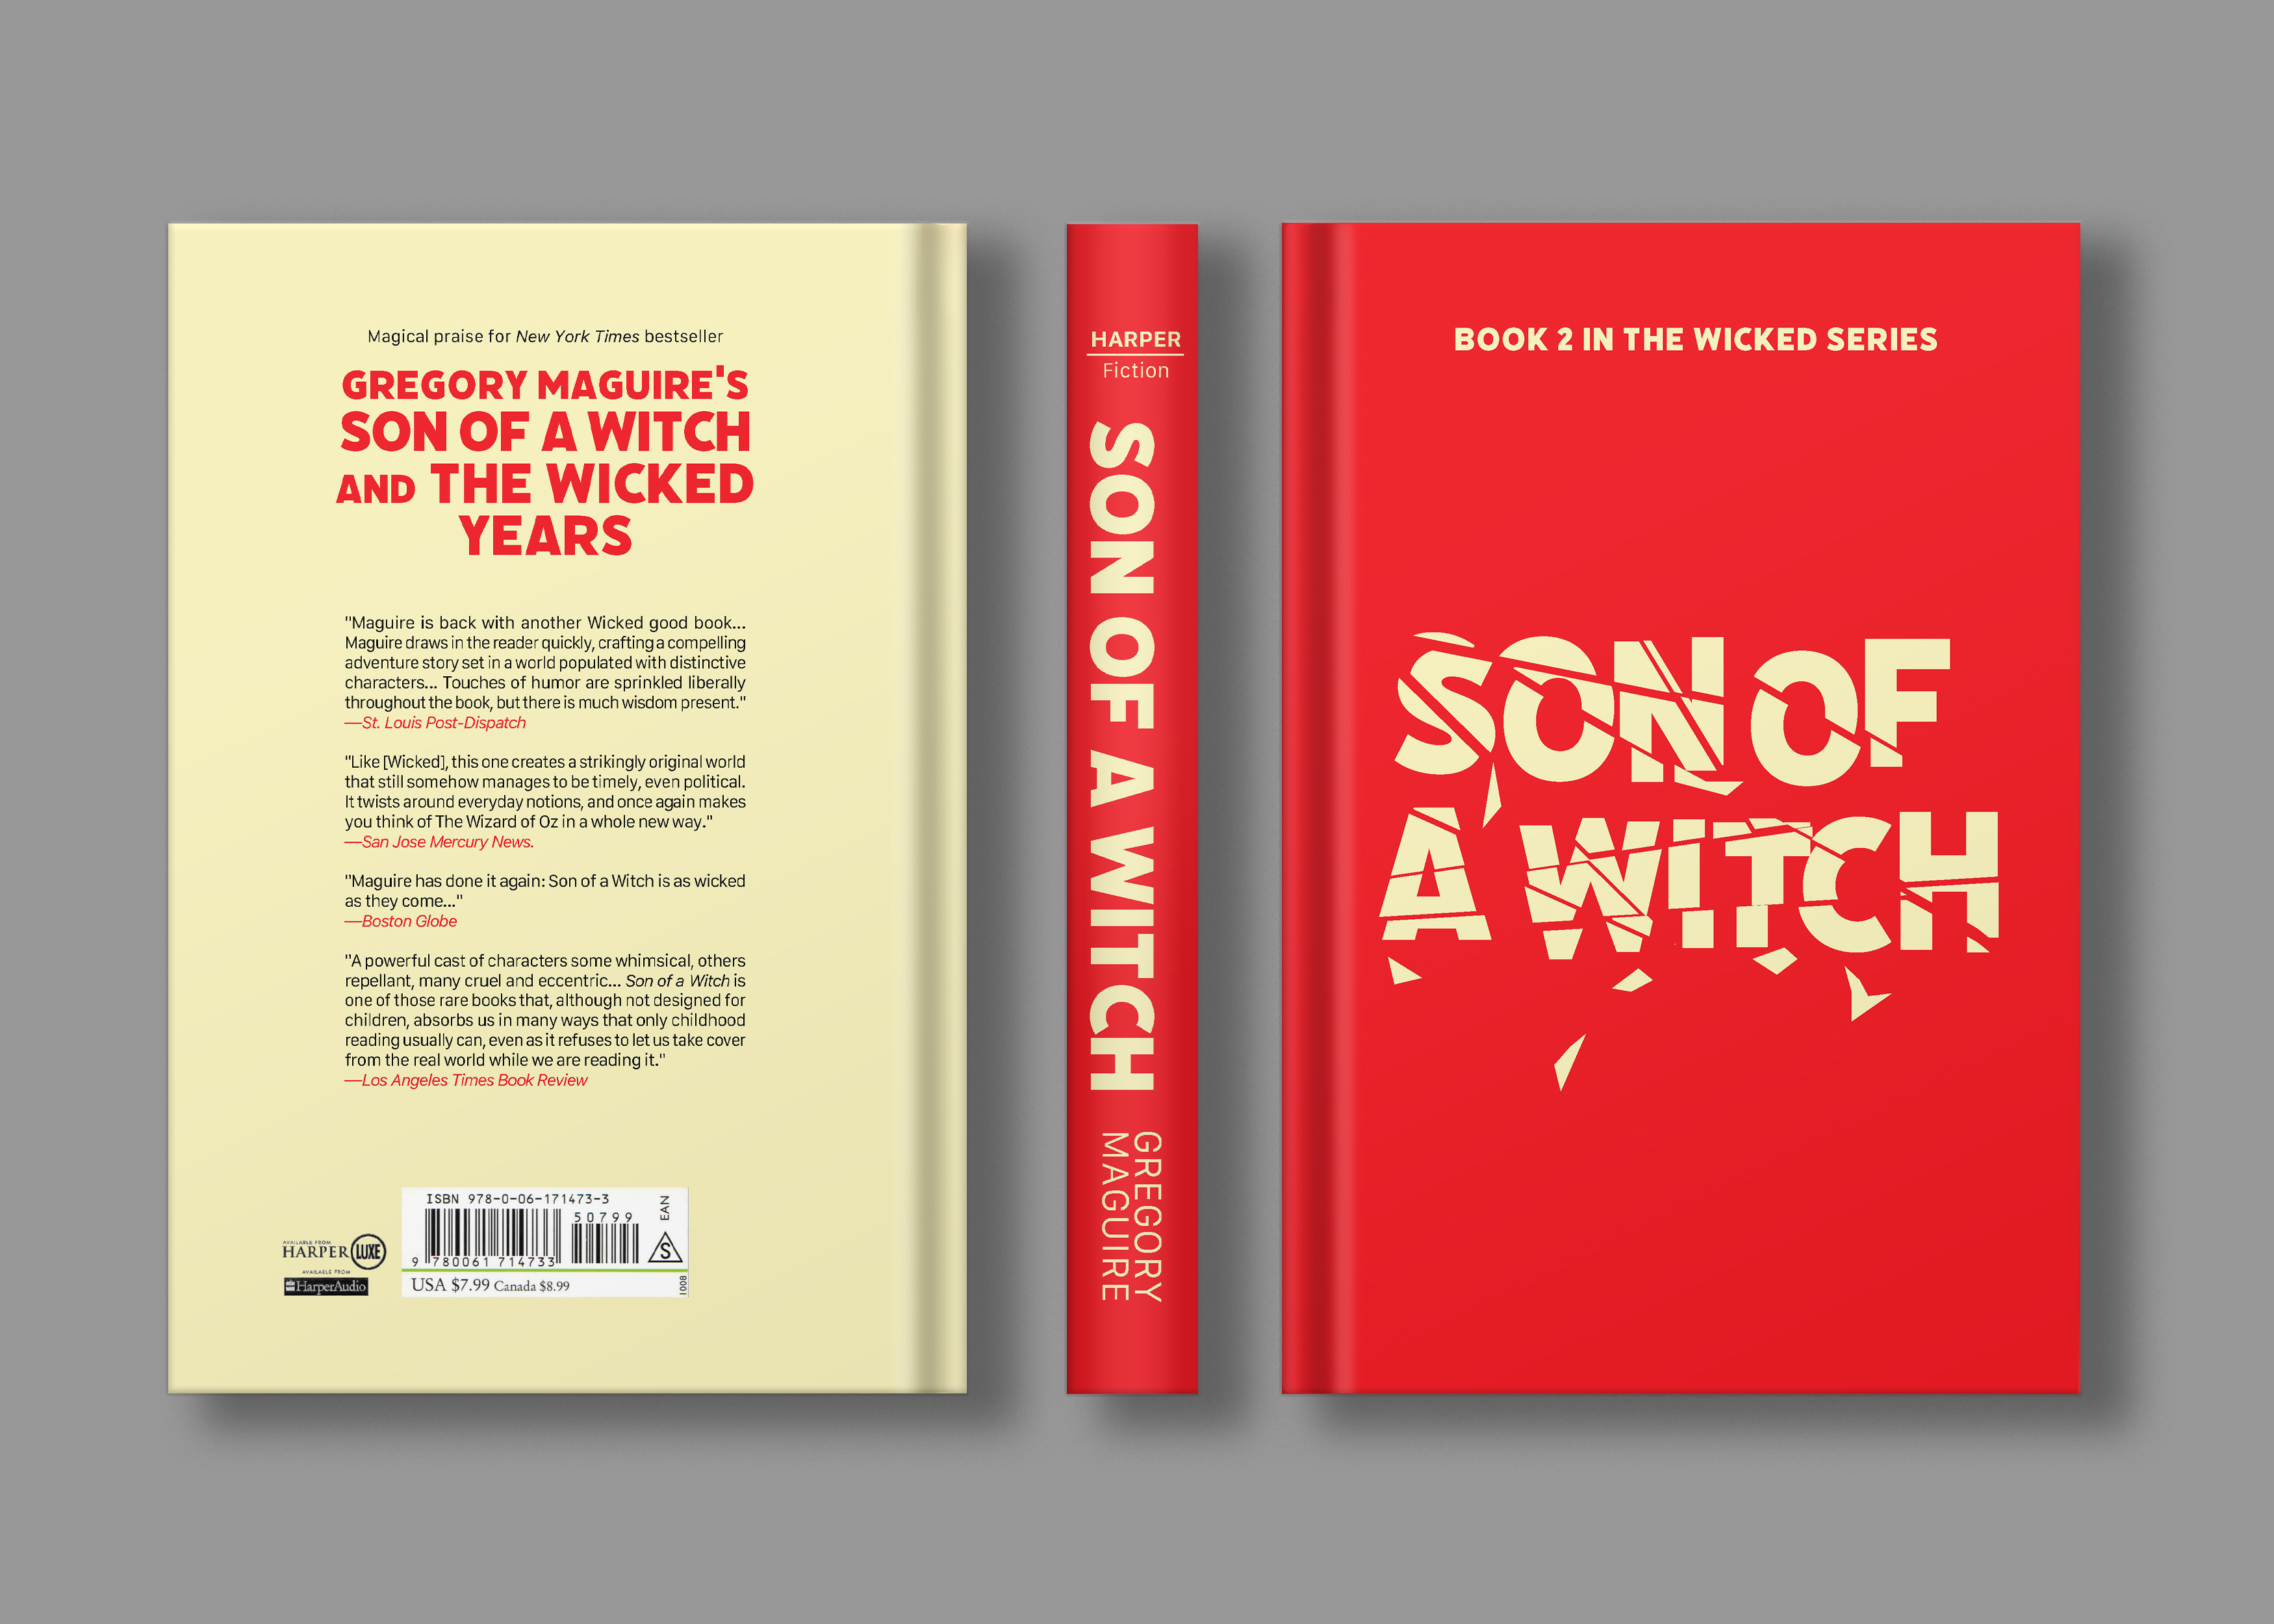 Wicked Words: Typography for the Wicked Years Quartet